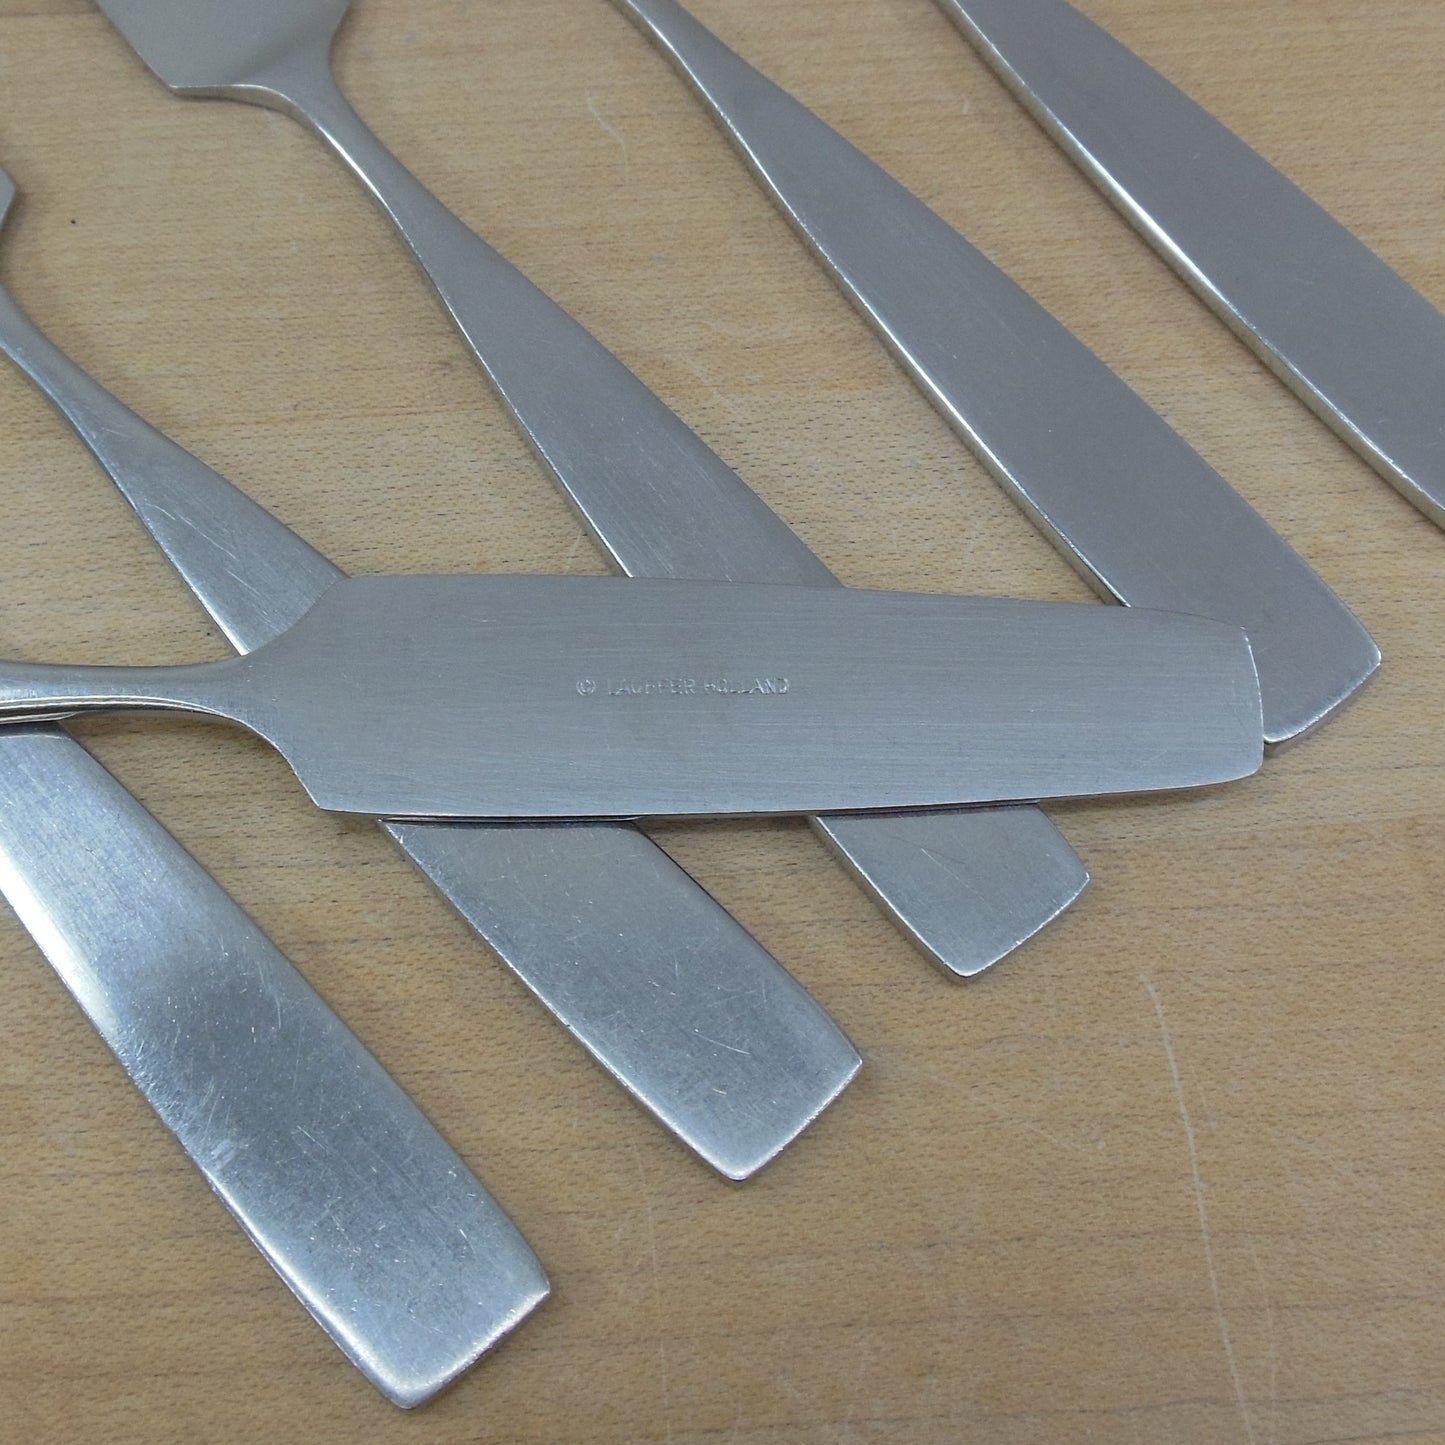 Towle Lauffer Bedford Holland Stainless Flatware - 6 Butter Spreader Knives used